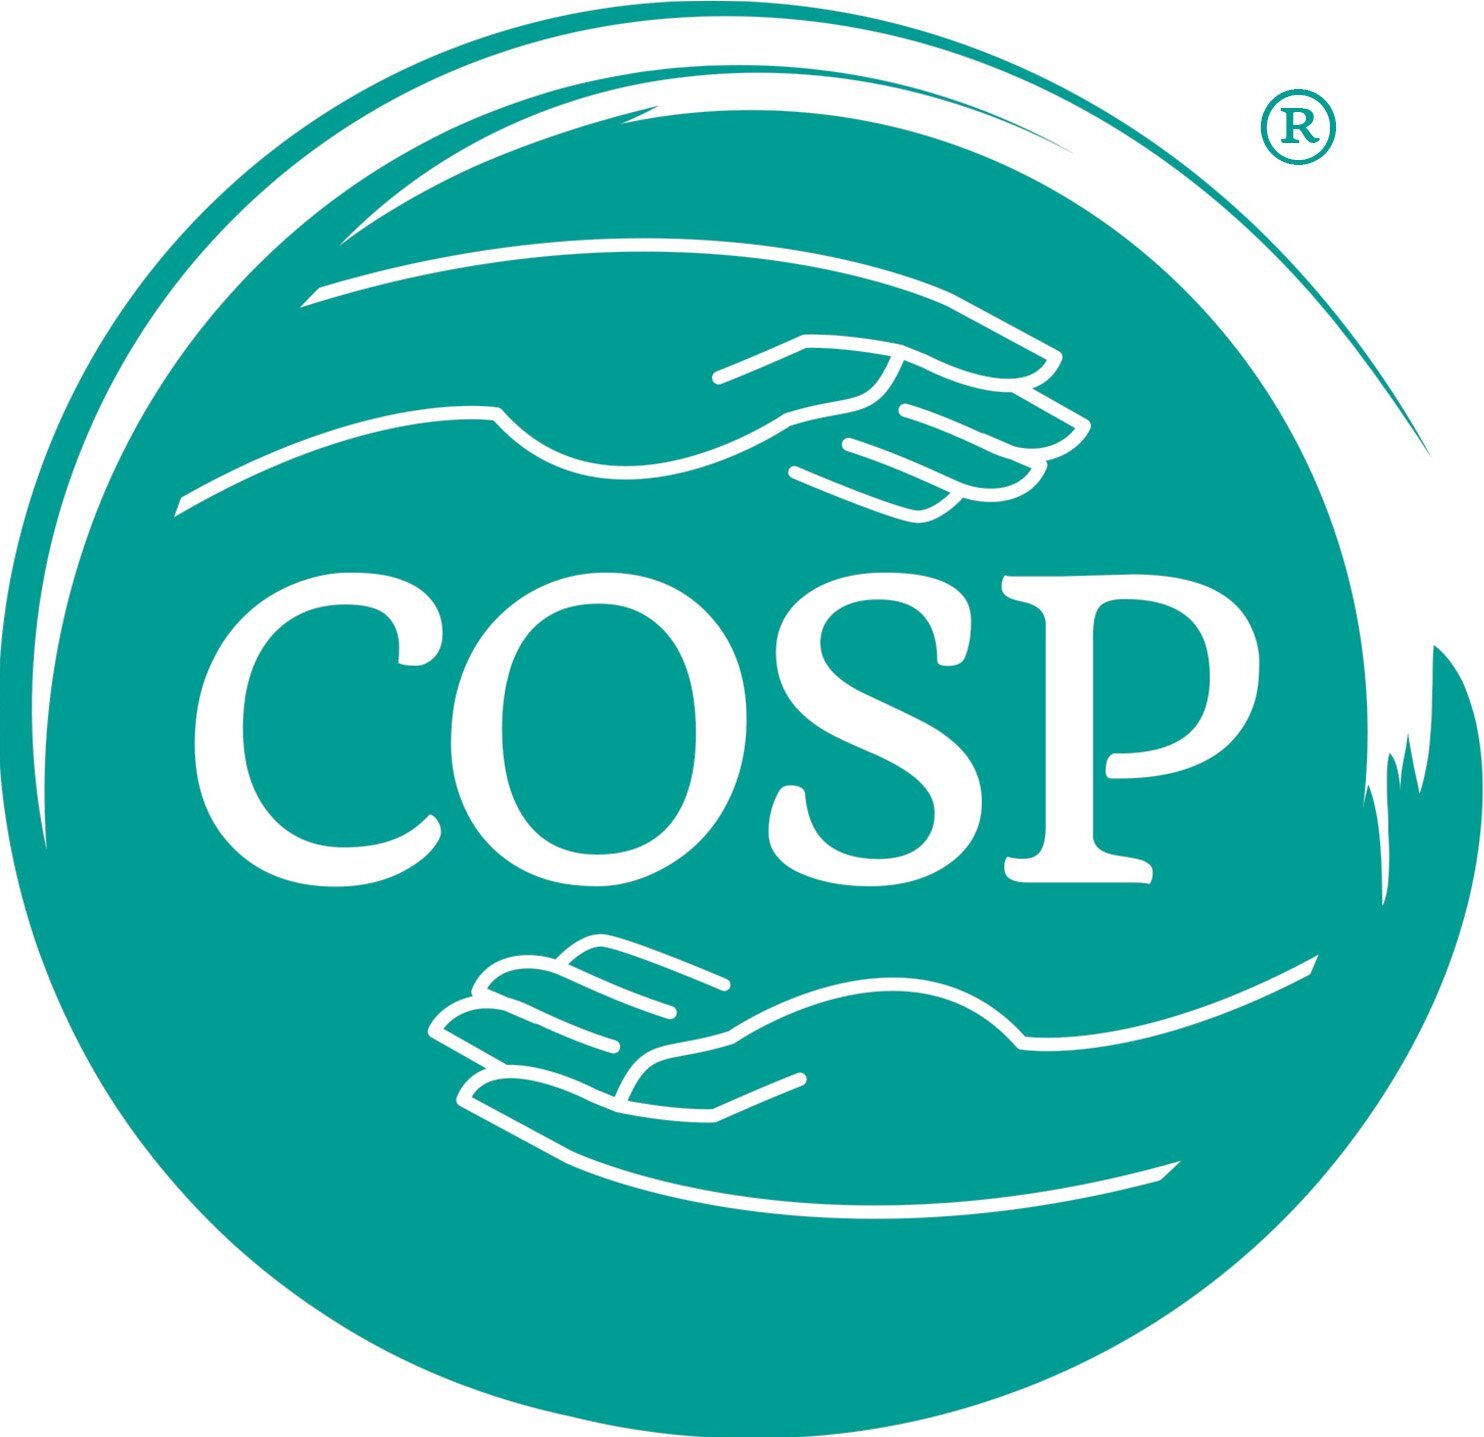 COSP_logo_closed_green - to be used by certified COSP Facilitators, can include on website